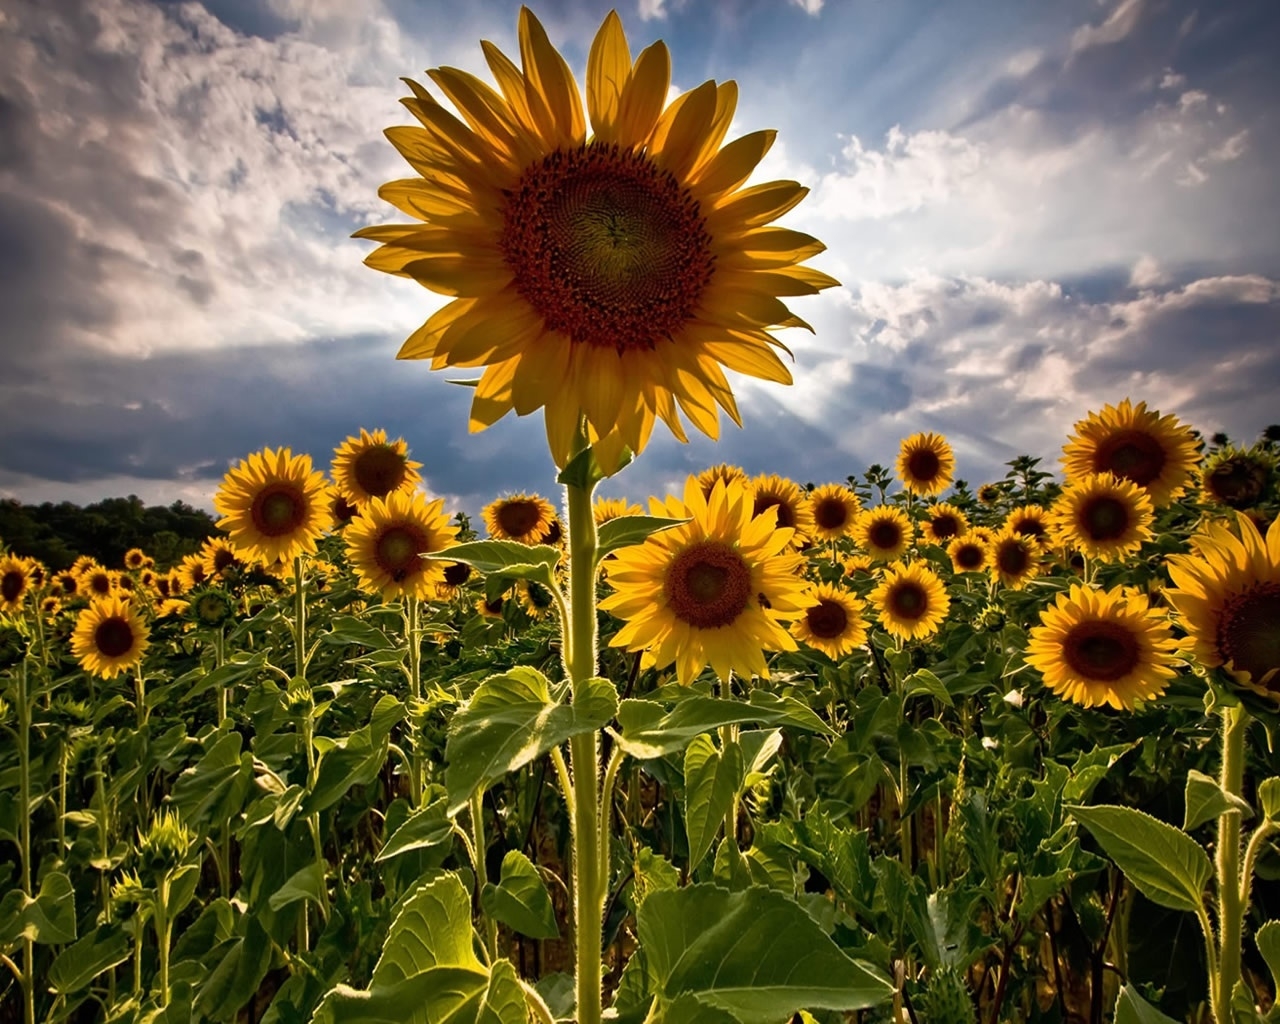 Amazing Sunflowers for 1280 x 1024 resolution